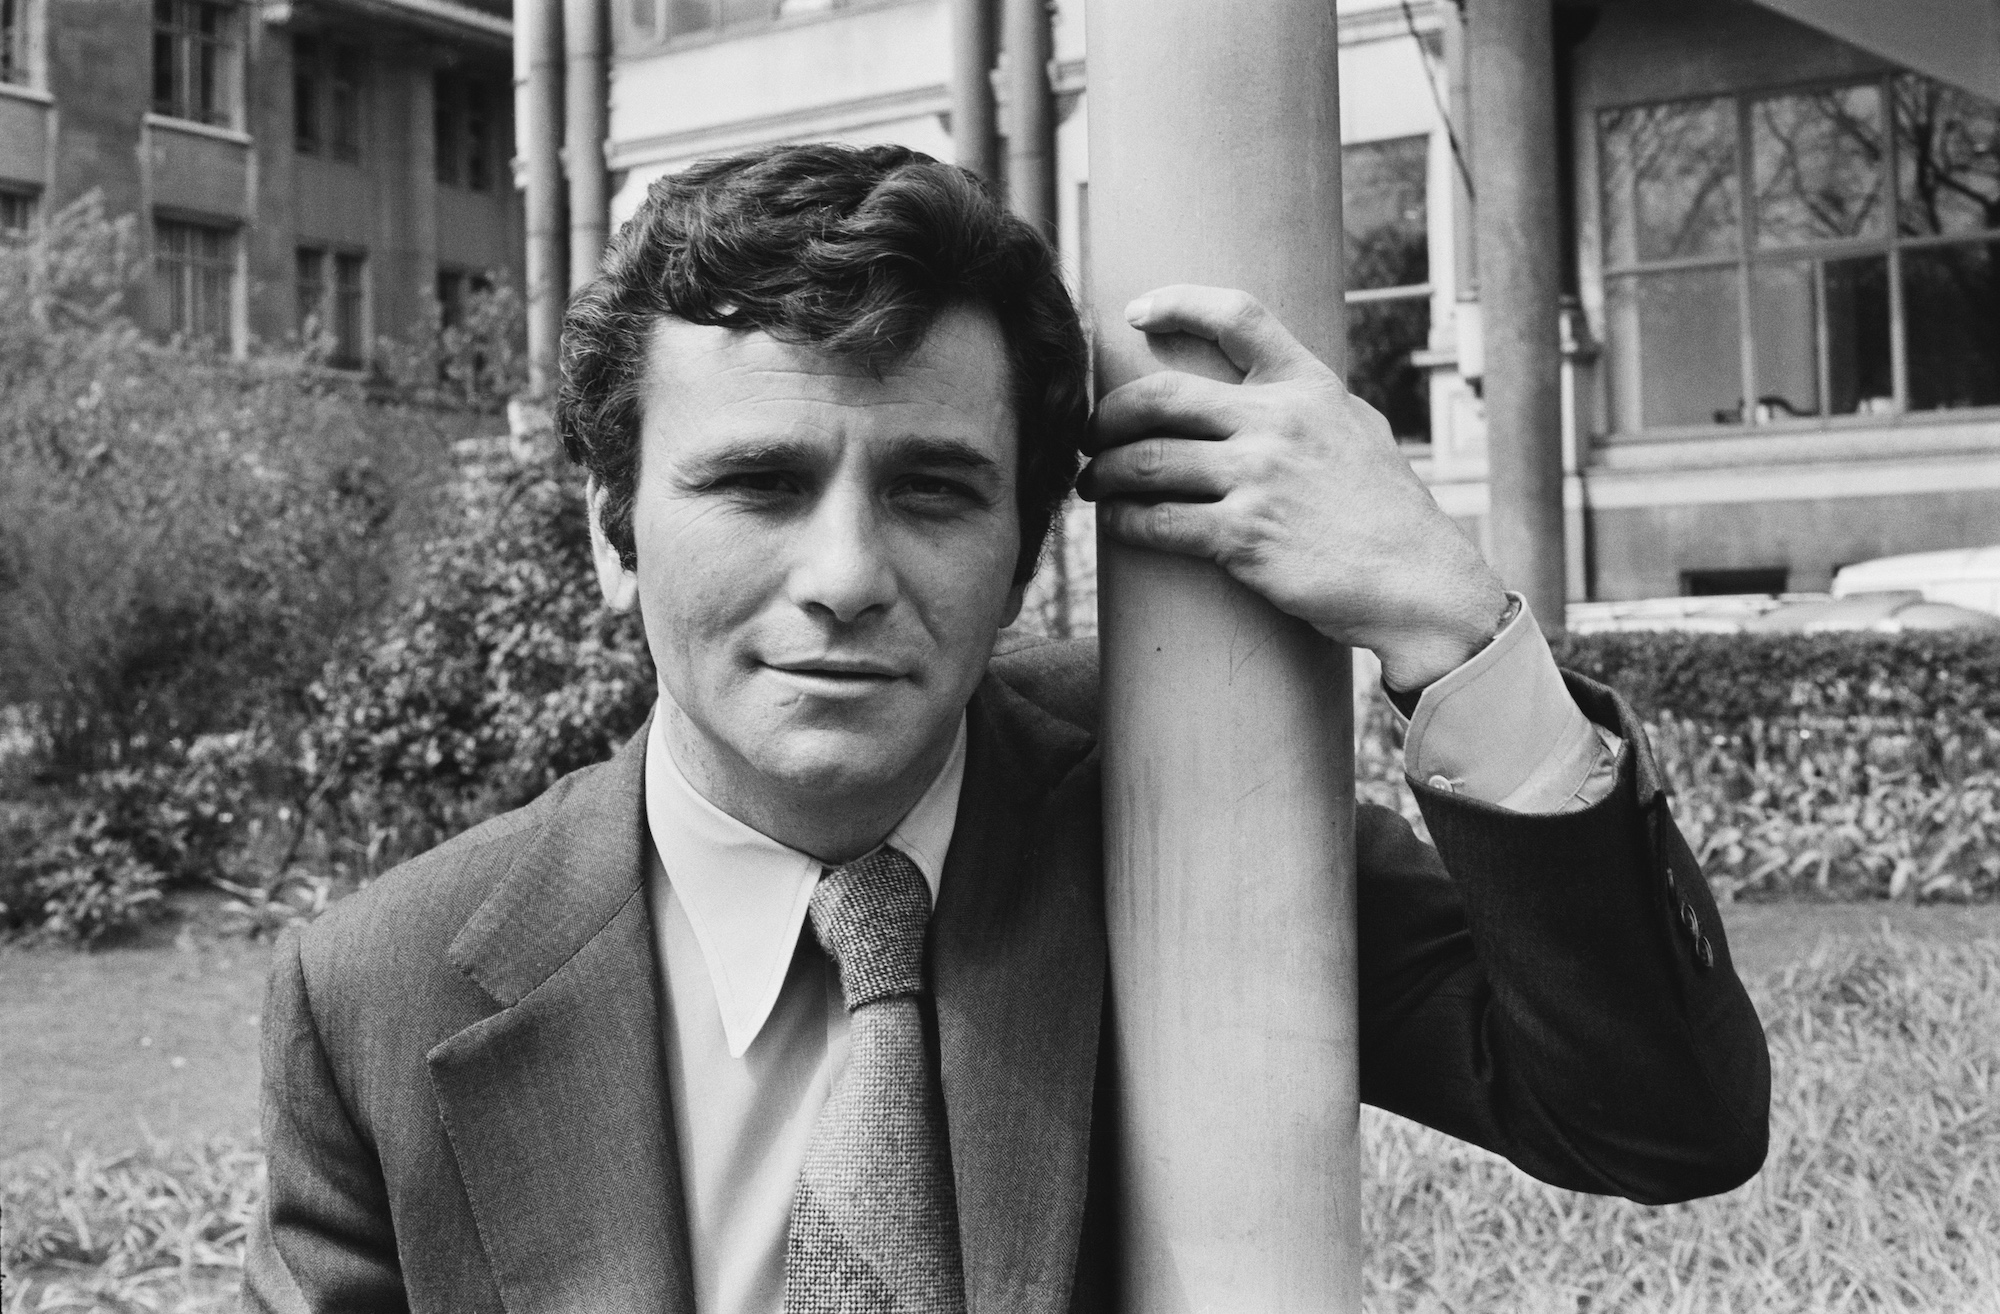 In Confidence withPeter Falk